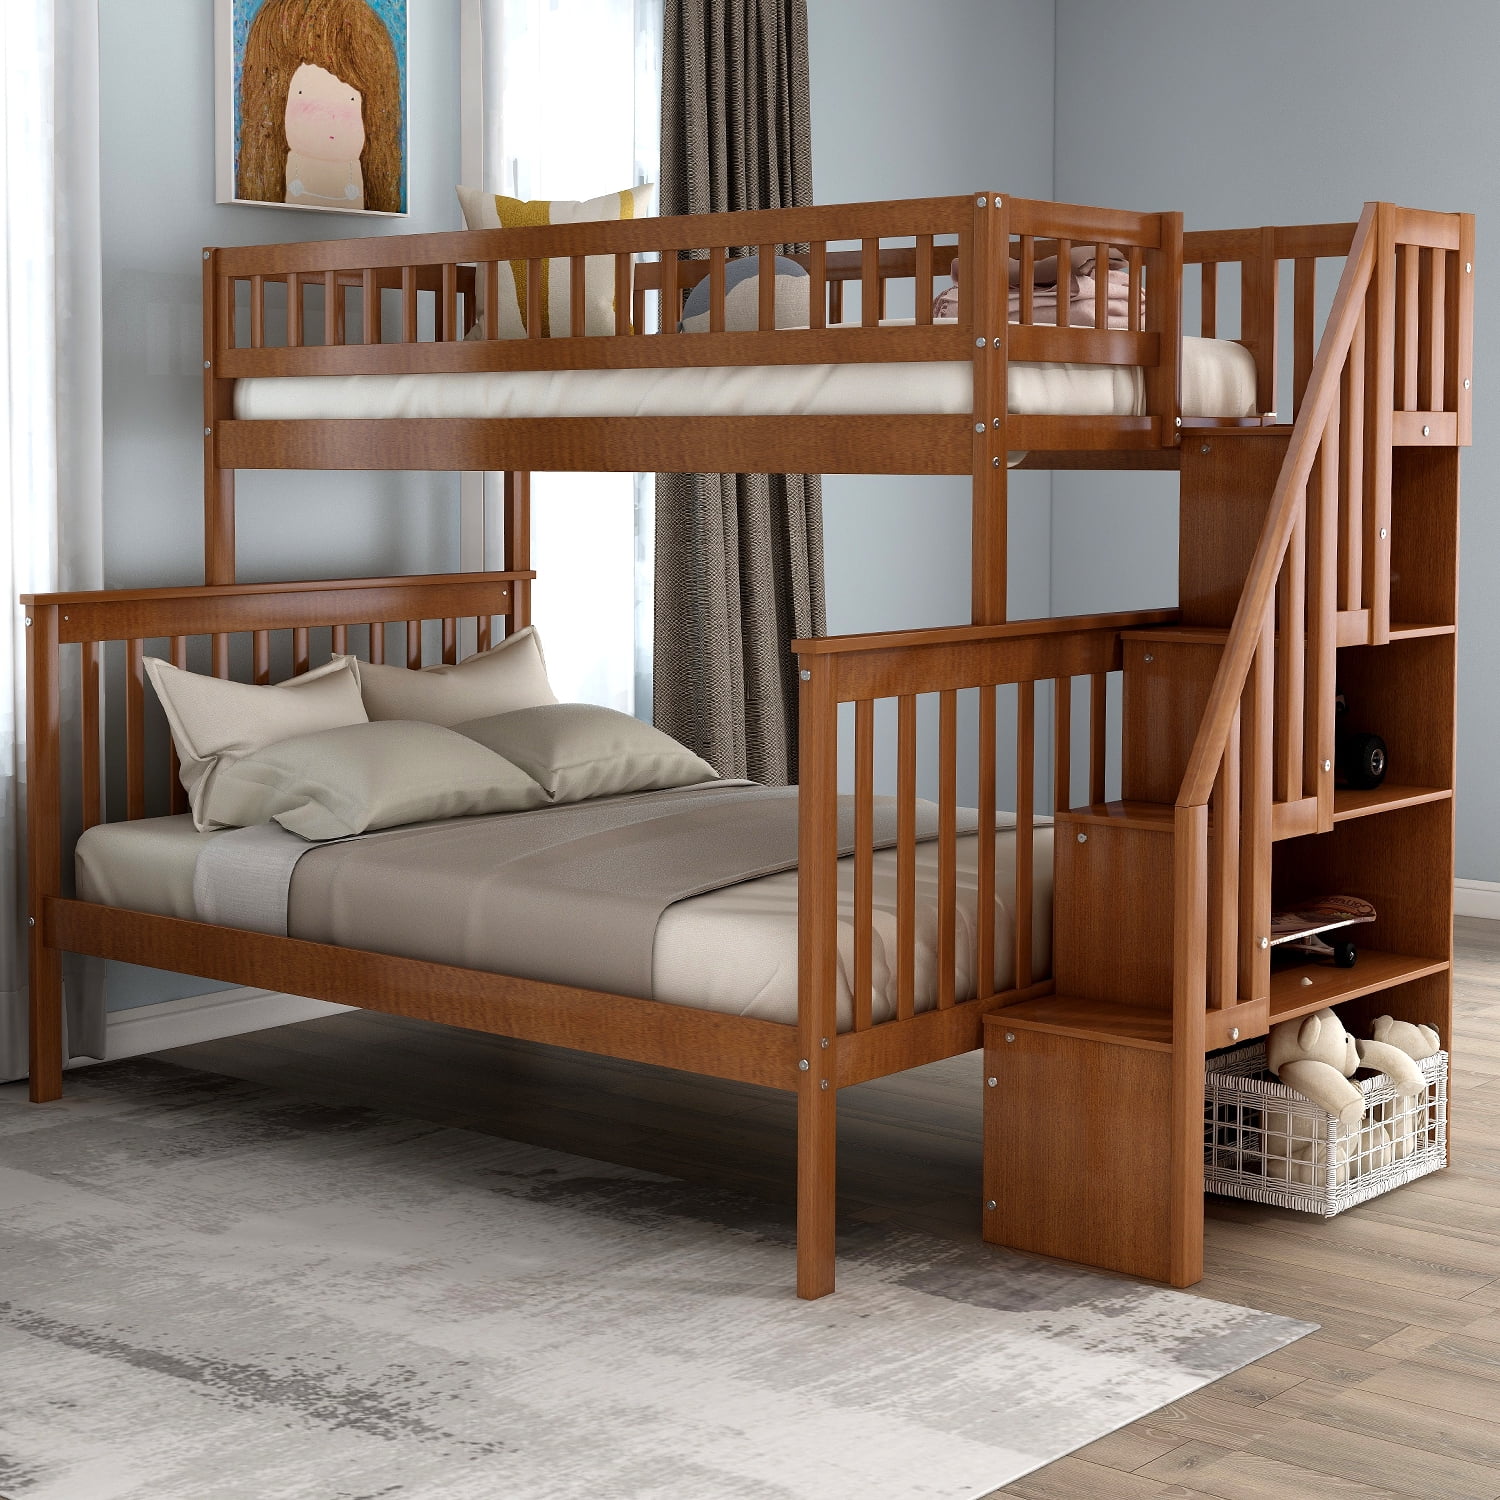 EUROCO Twin Over Full Bunk Bed with Stairs and Storage for Kids, Multiple Colors